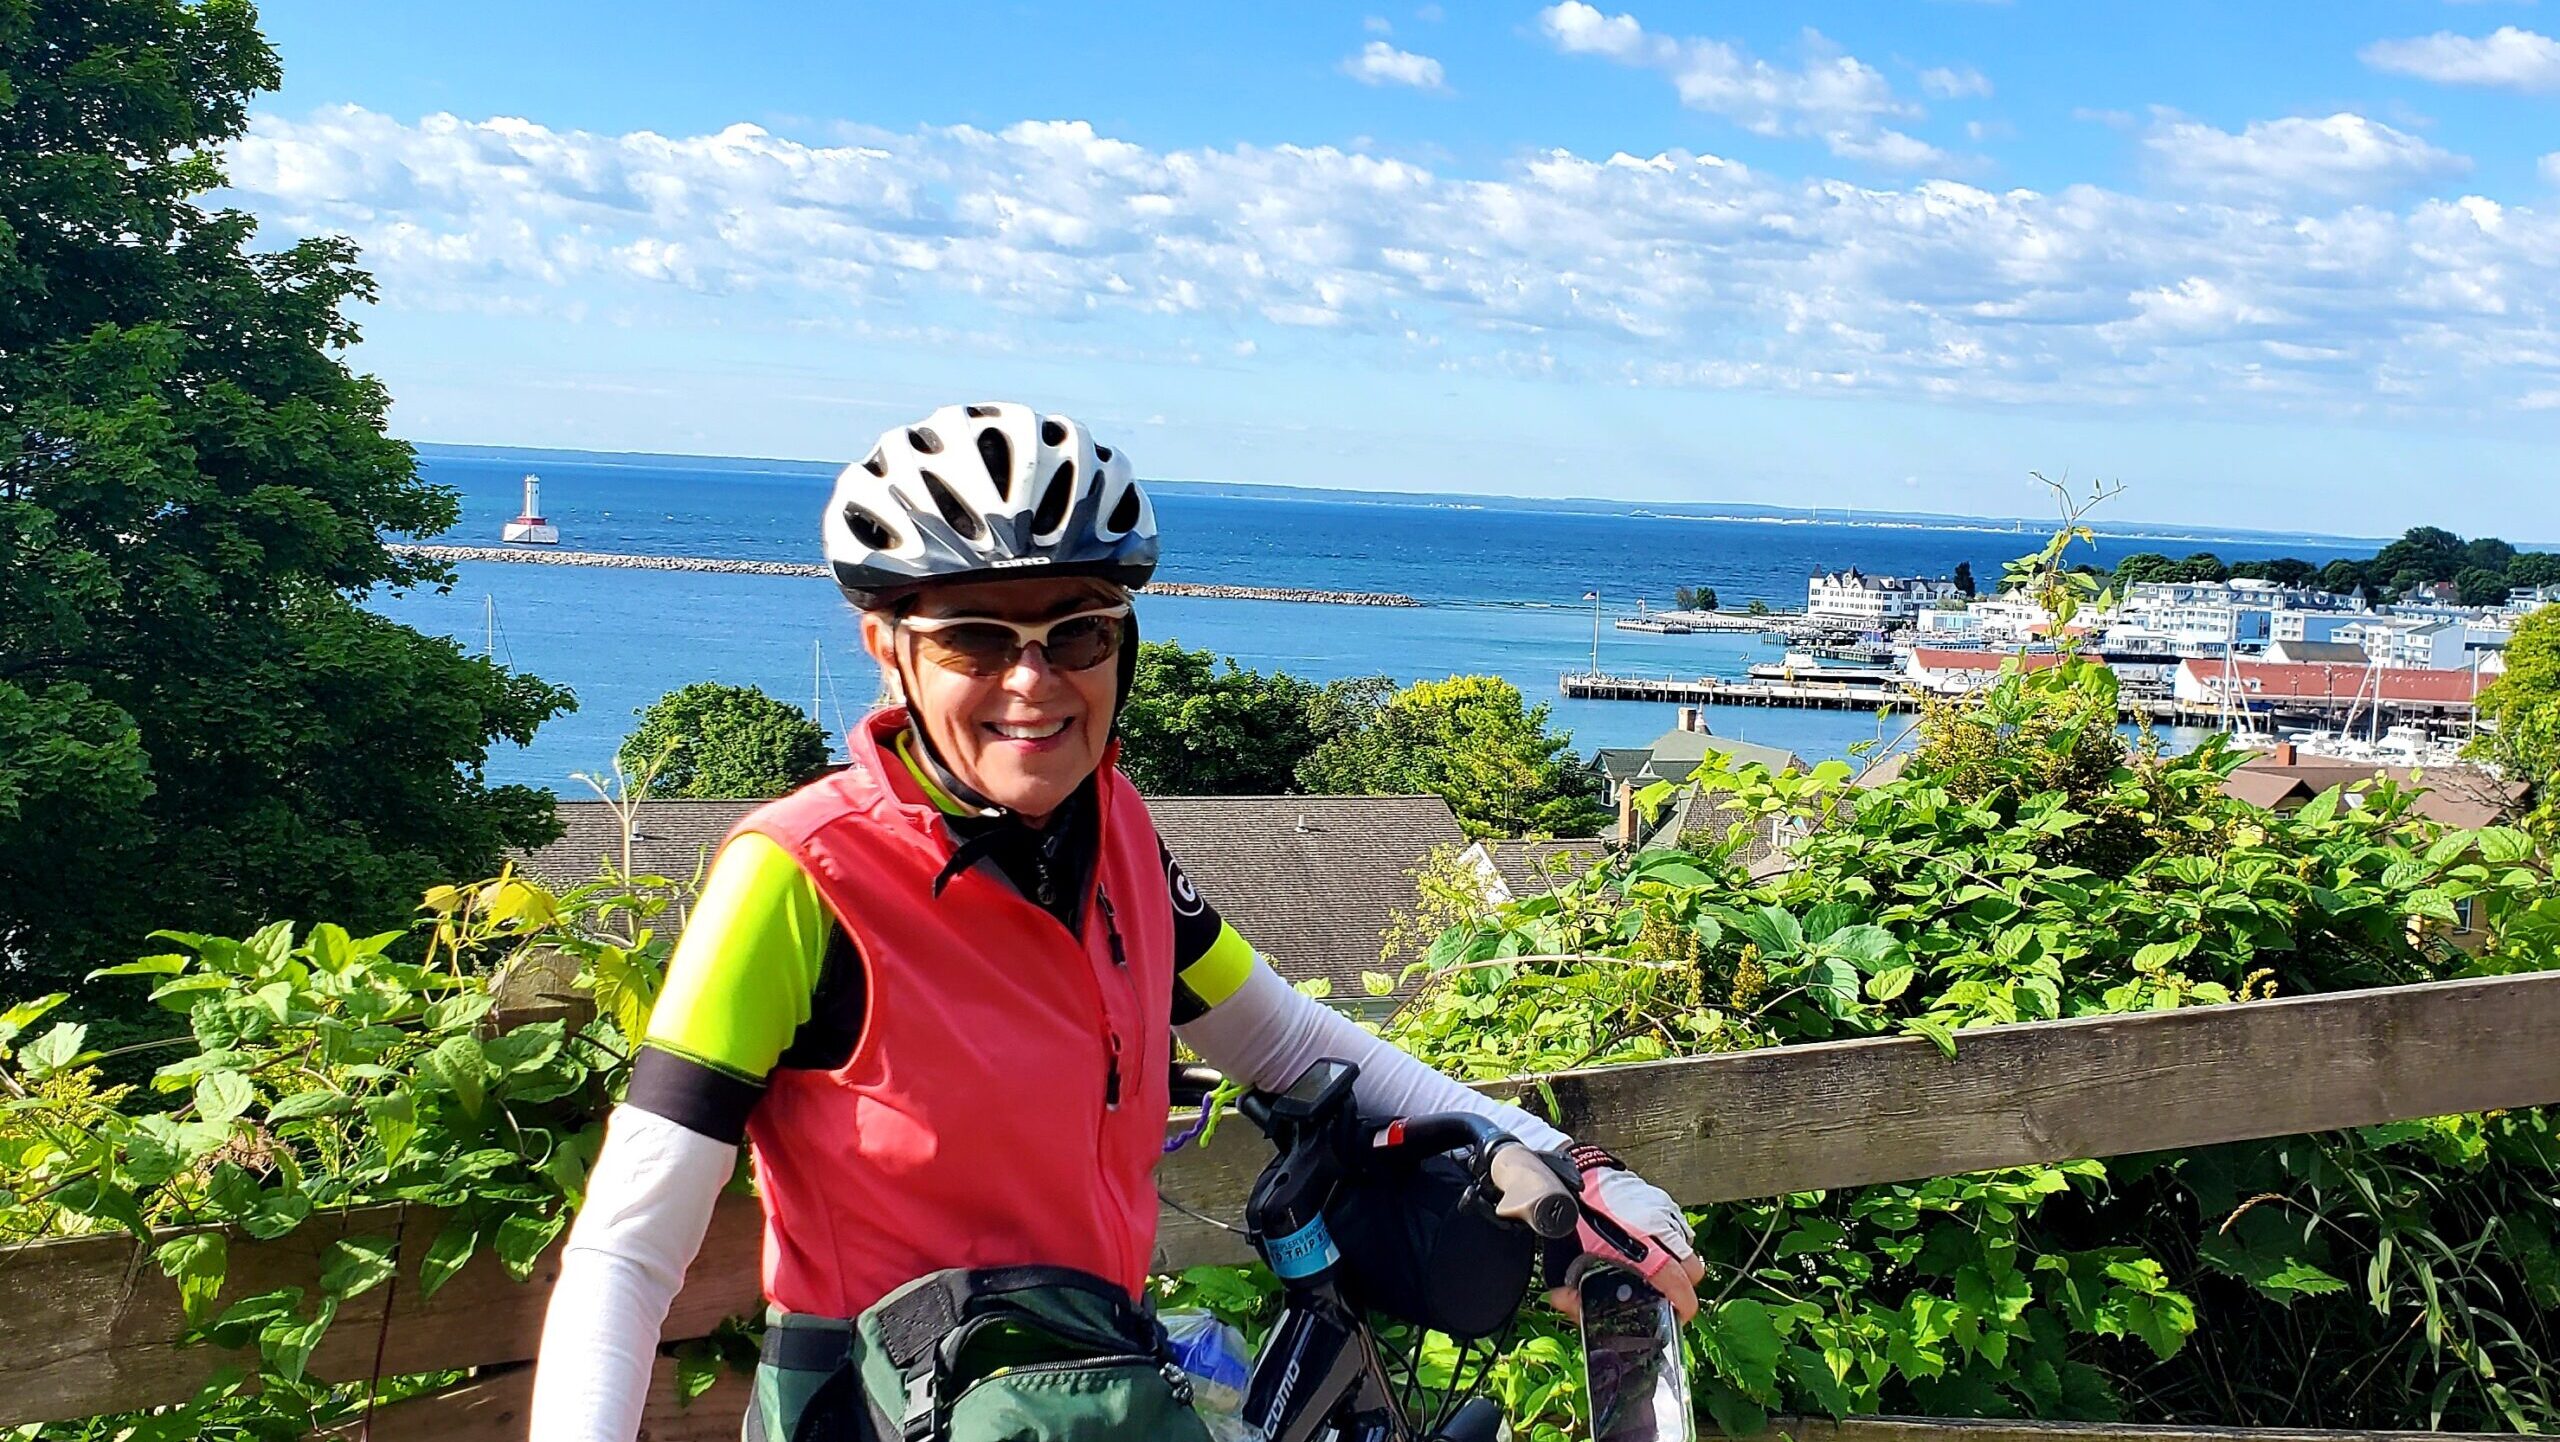 Melinda Stearns wearing a white bike helmet and sunglasses and posing with her bike in front of Lake Michigan.